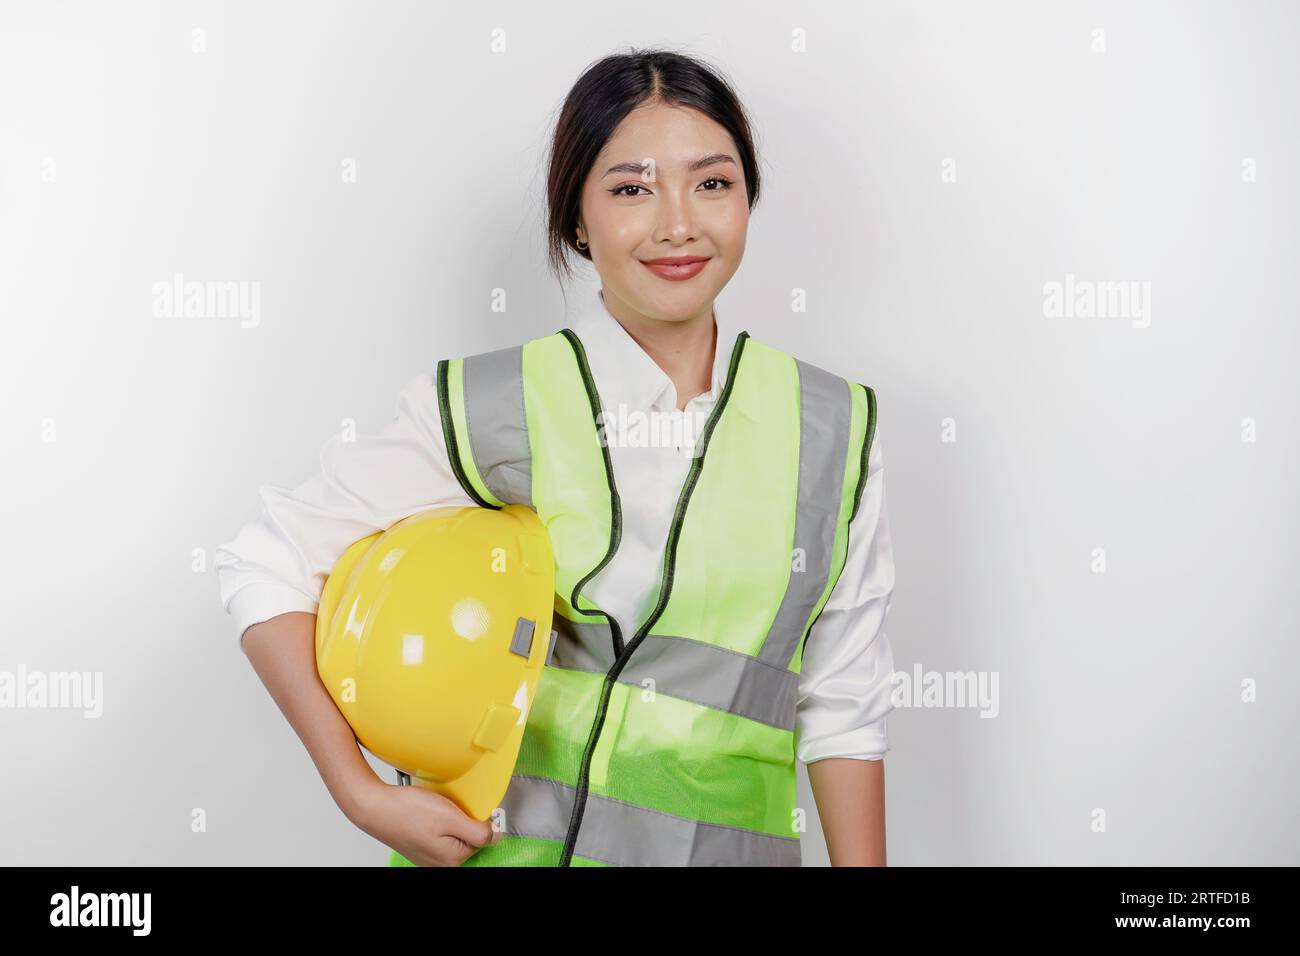 Confident Asian woman labor worker is smiling to the camera, bringing her safety helmet, wearing yellow safety helmet, green vest and uniform, isolate Stock Photo